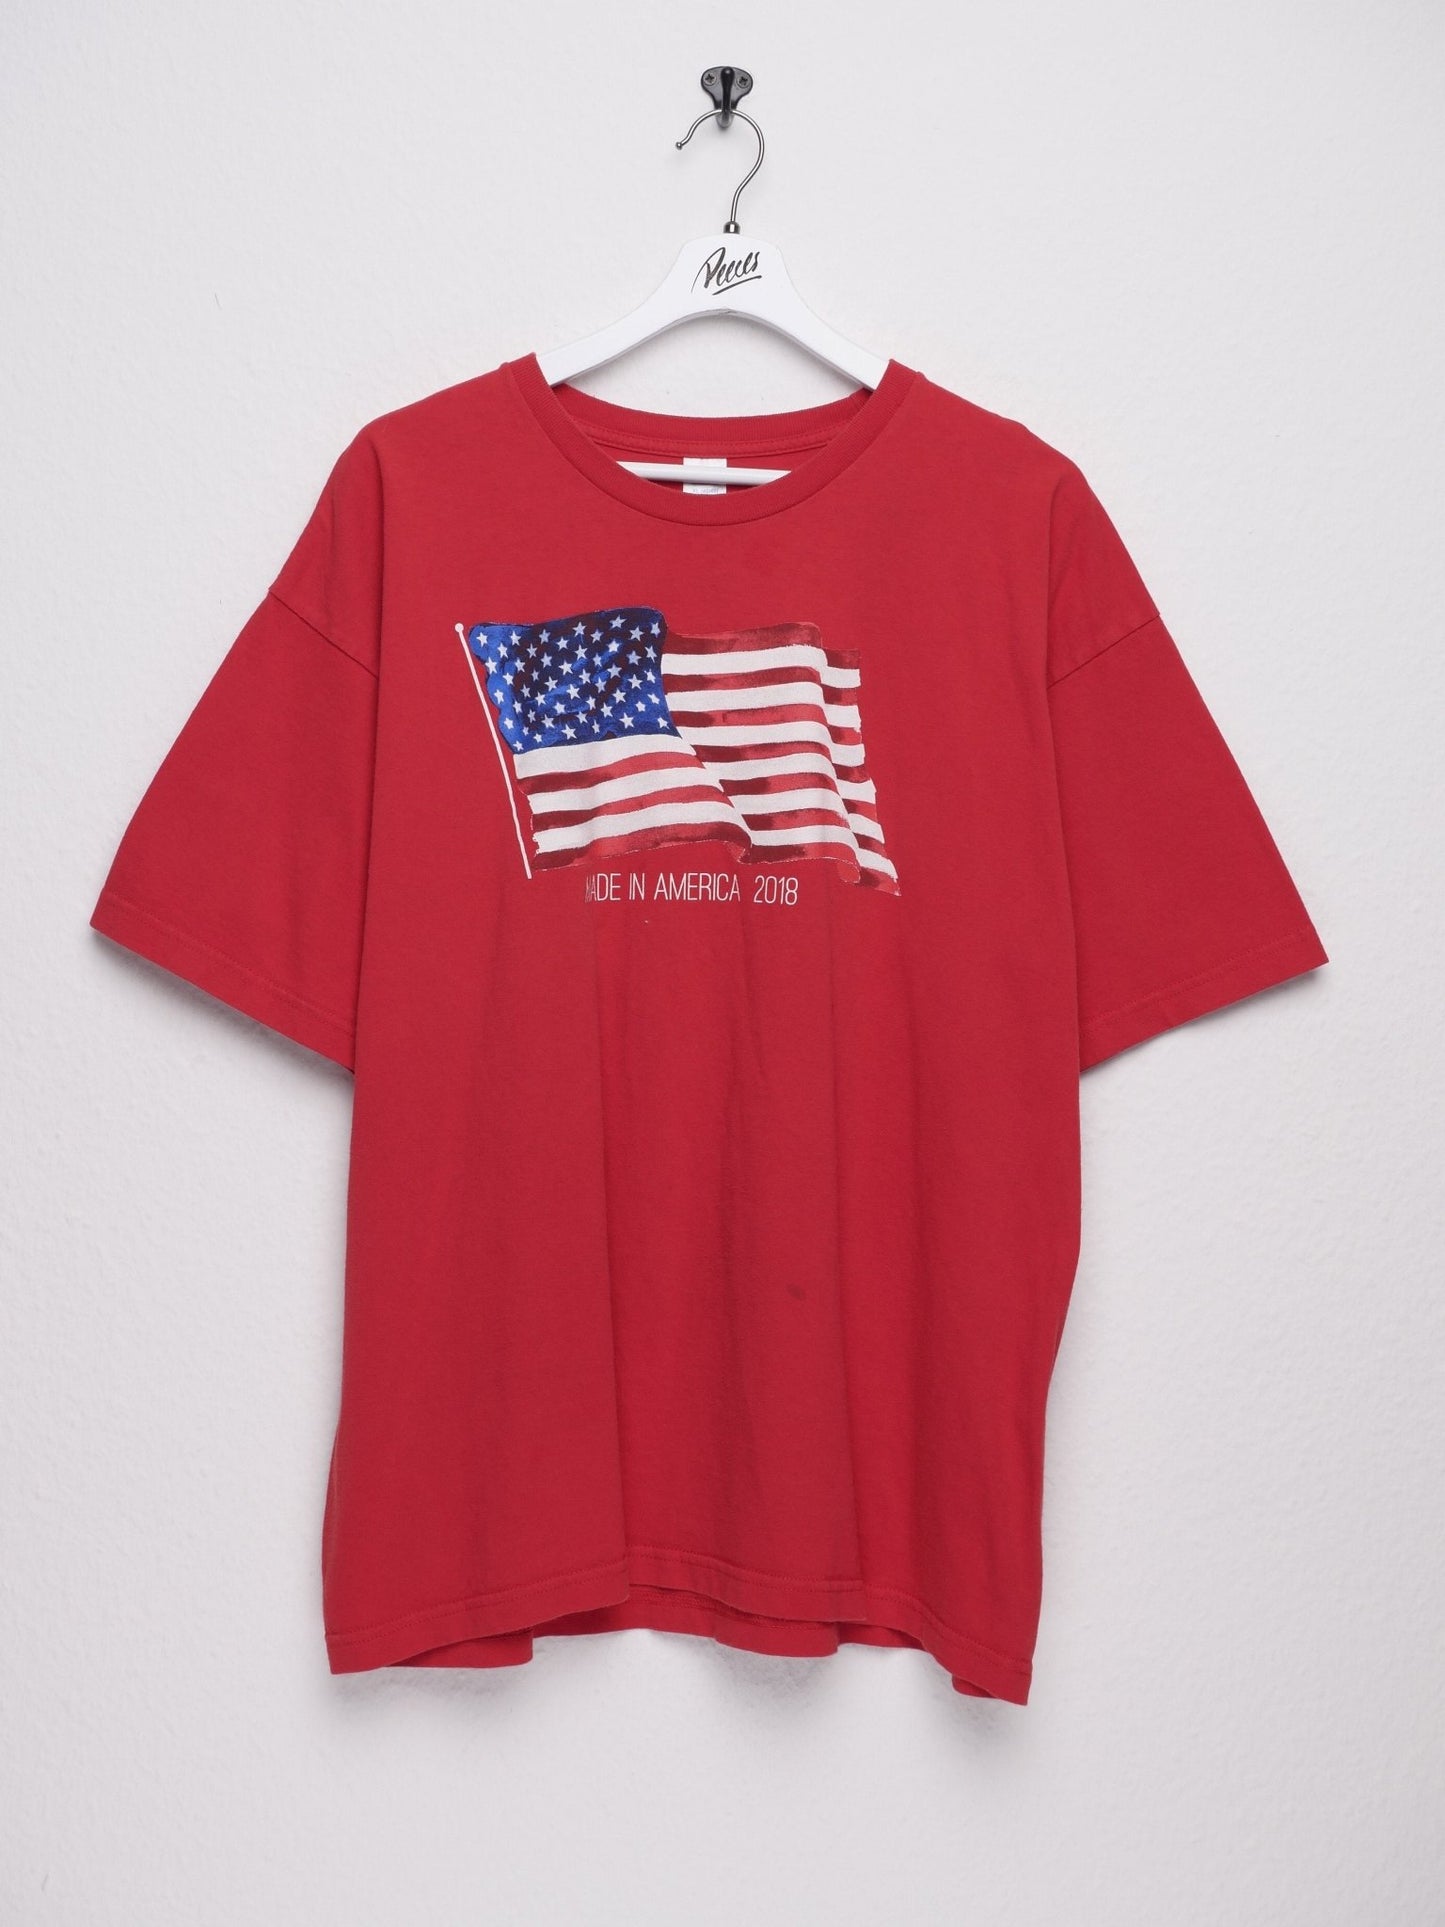 'Made in America 2018' printed Graphic red Shirt - Peeces